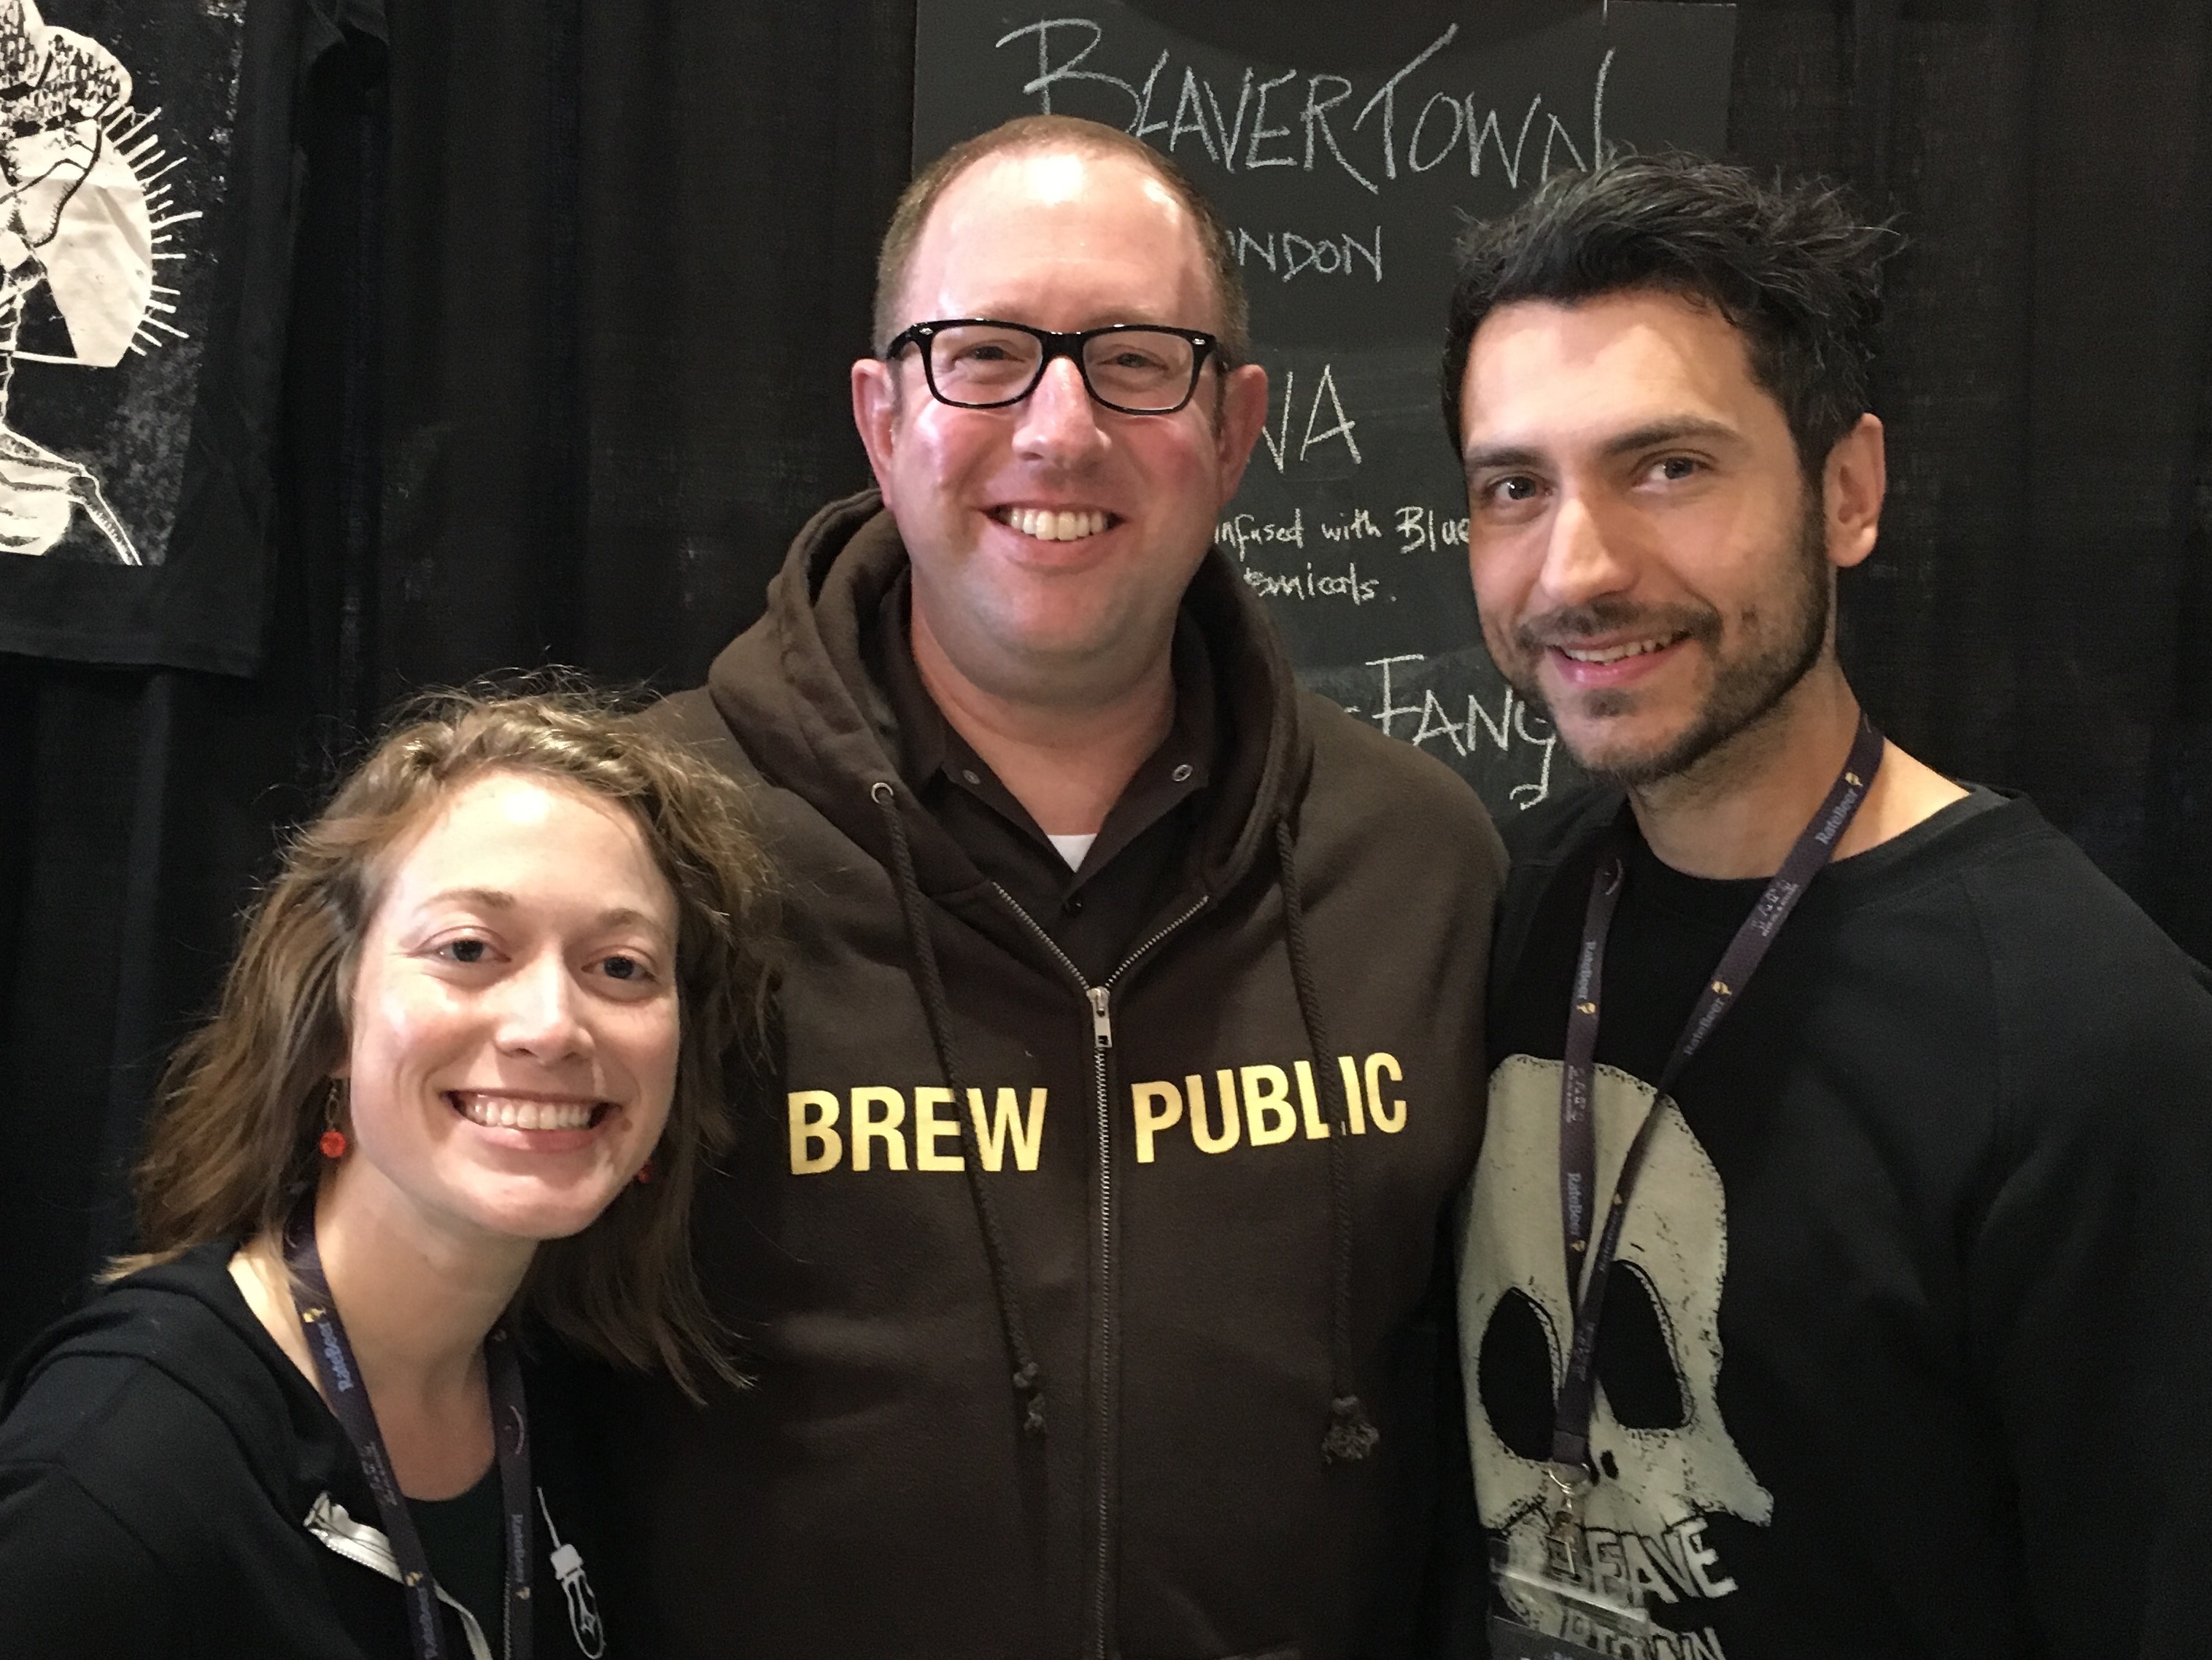 Karen King of Side Project, D.J. Paul of Brewpublic and Logan Plant of Beavertown Brewery at 2016 RateBeer Best Festival.